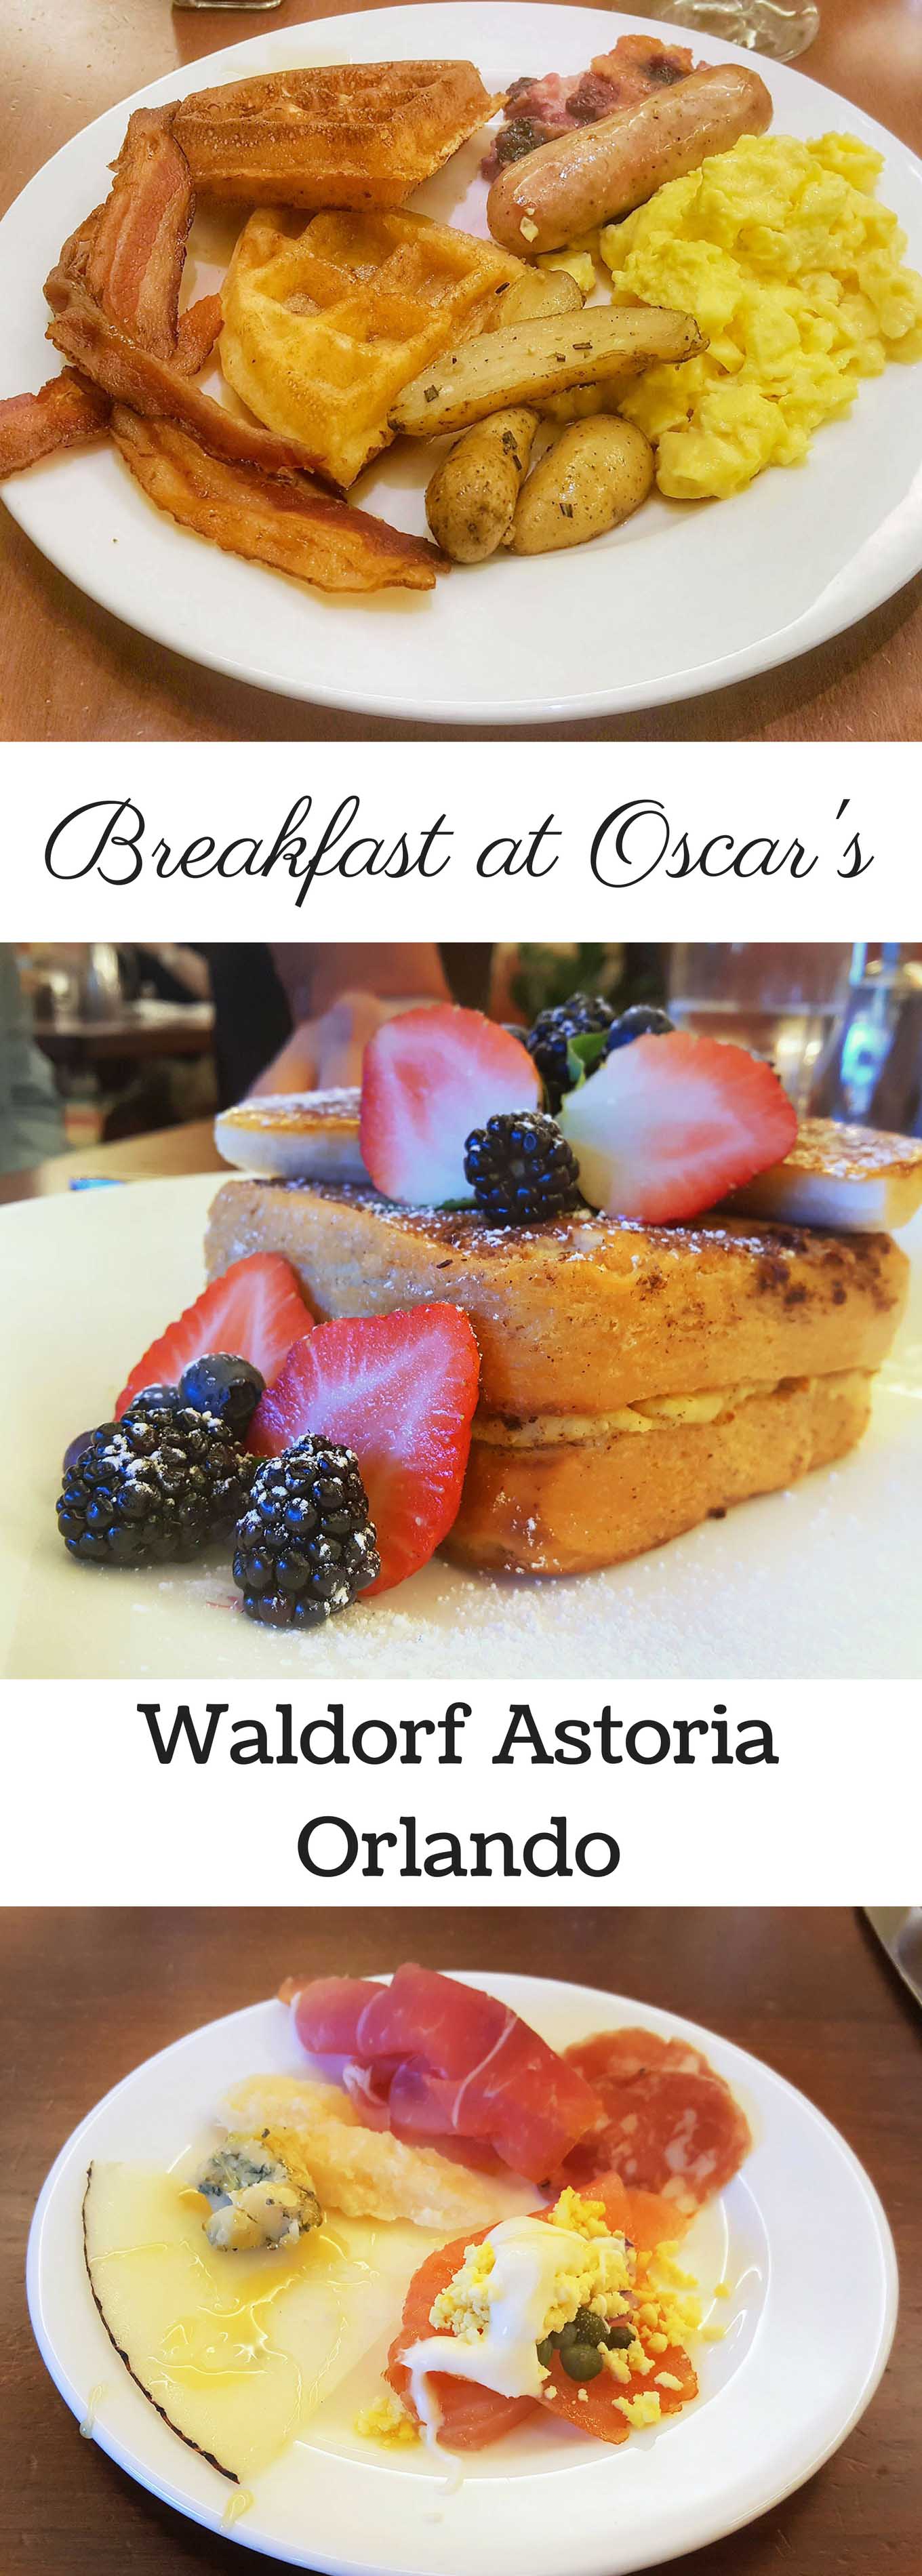  Breakfast at Oscar’s in the Waldorf Astoria Orlando is most amazing breakfast experience you’ll ever have 